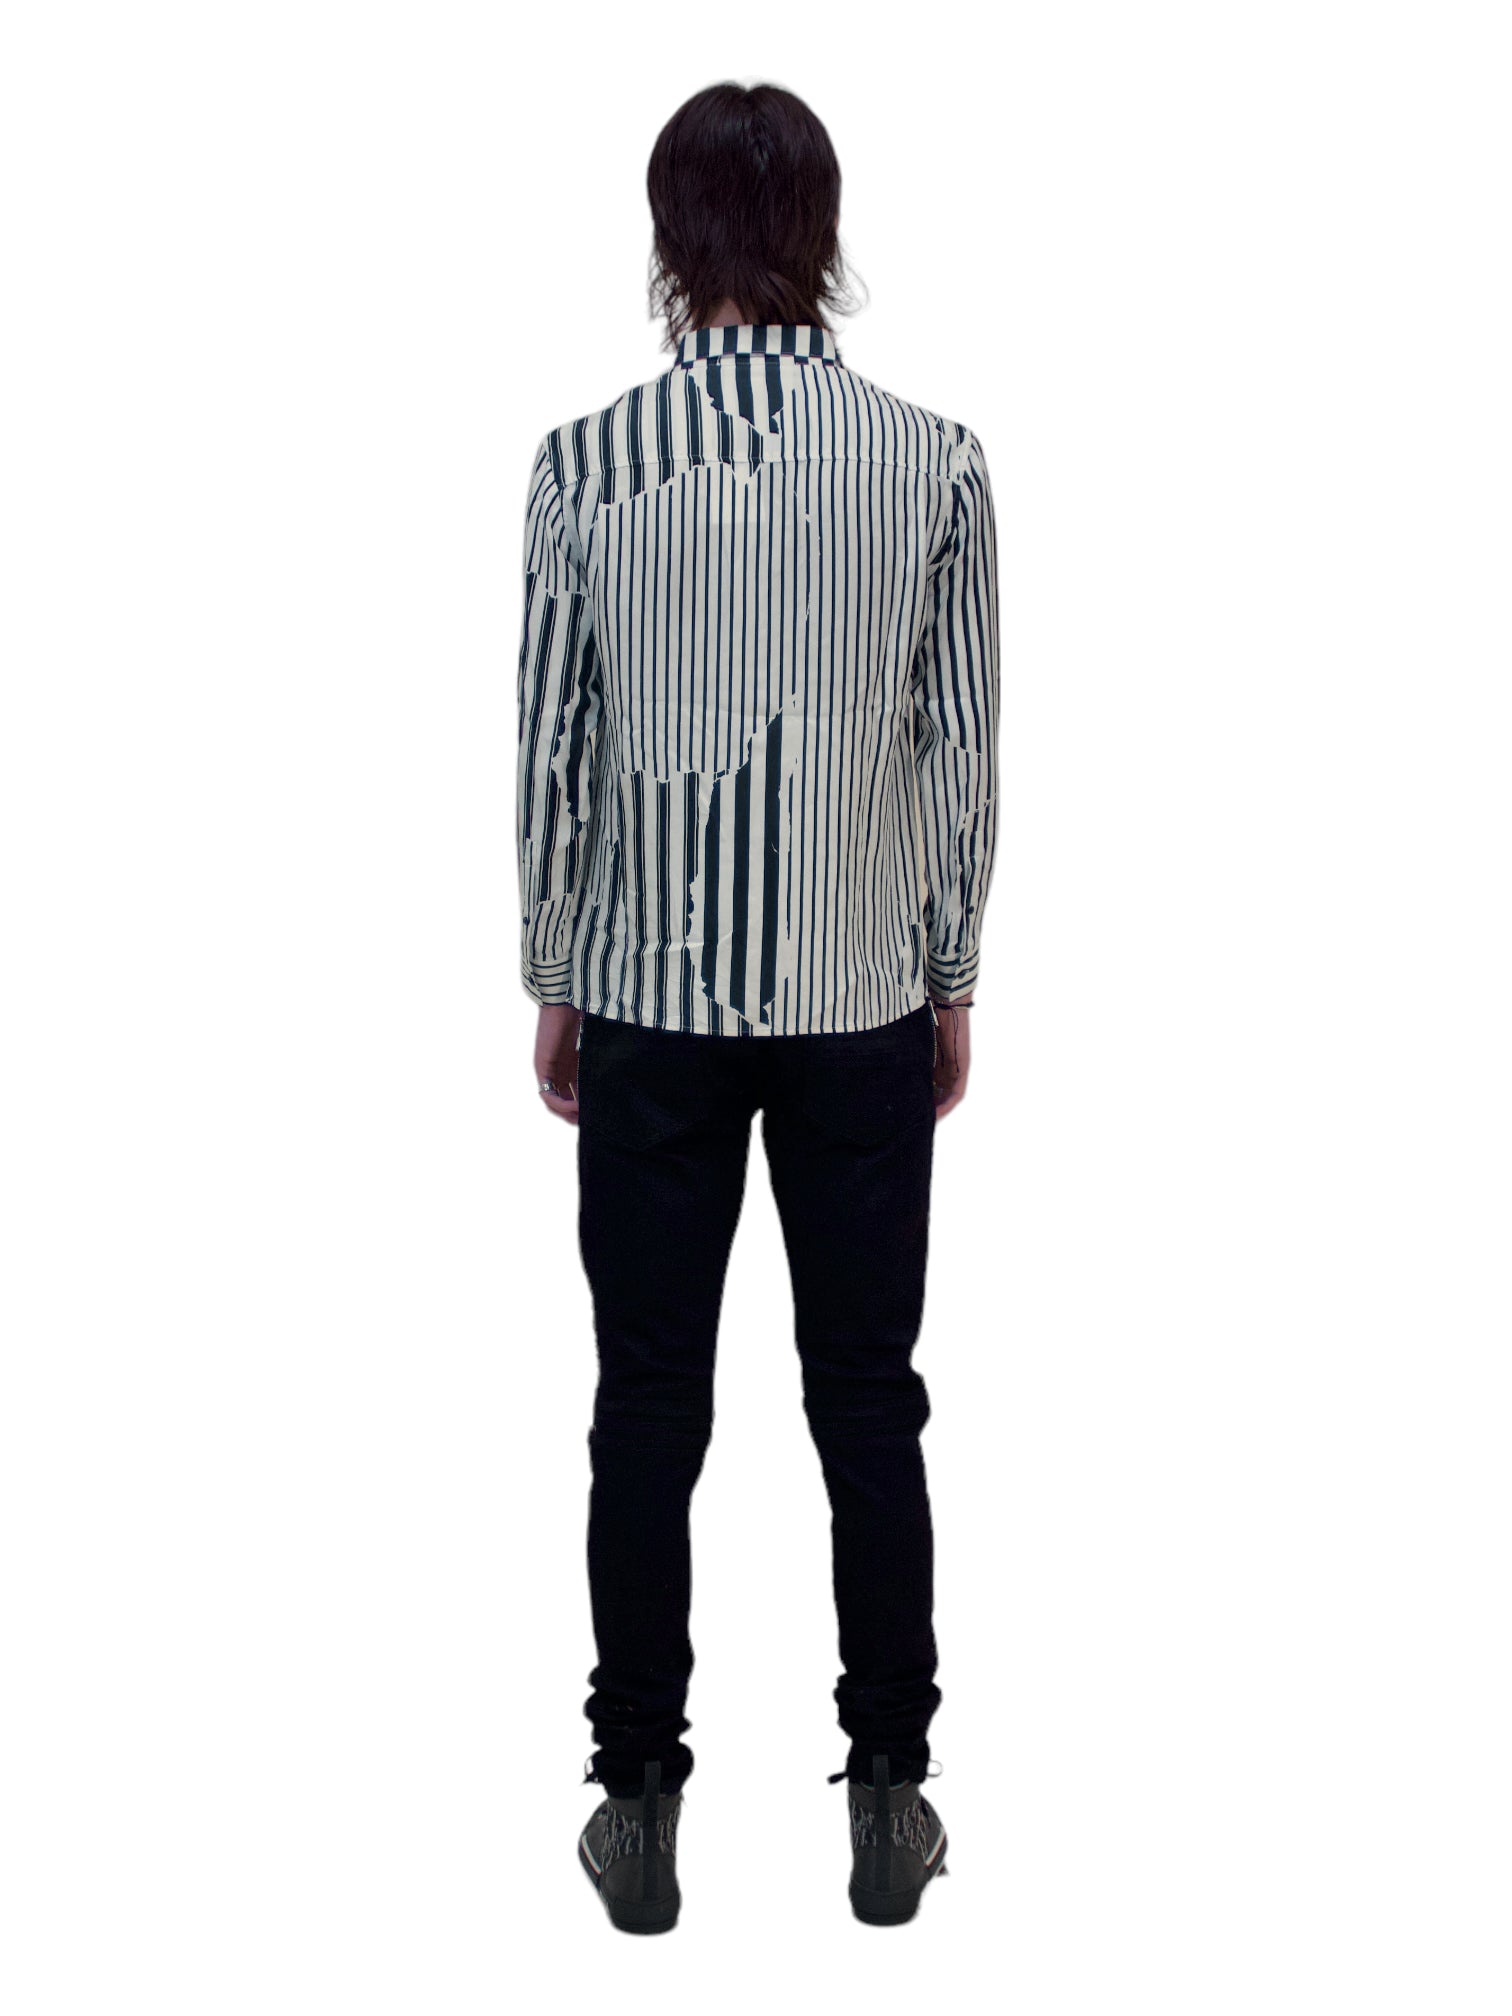 Haider Ackermann Black and White Stripped Silk Button Up Shirt - Genuine Design Luxury Consignment. New & Pre-Owned Clothing, Shoes, & Accessories. Calgary, Canada